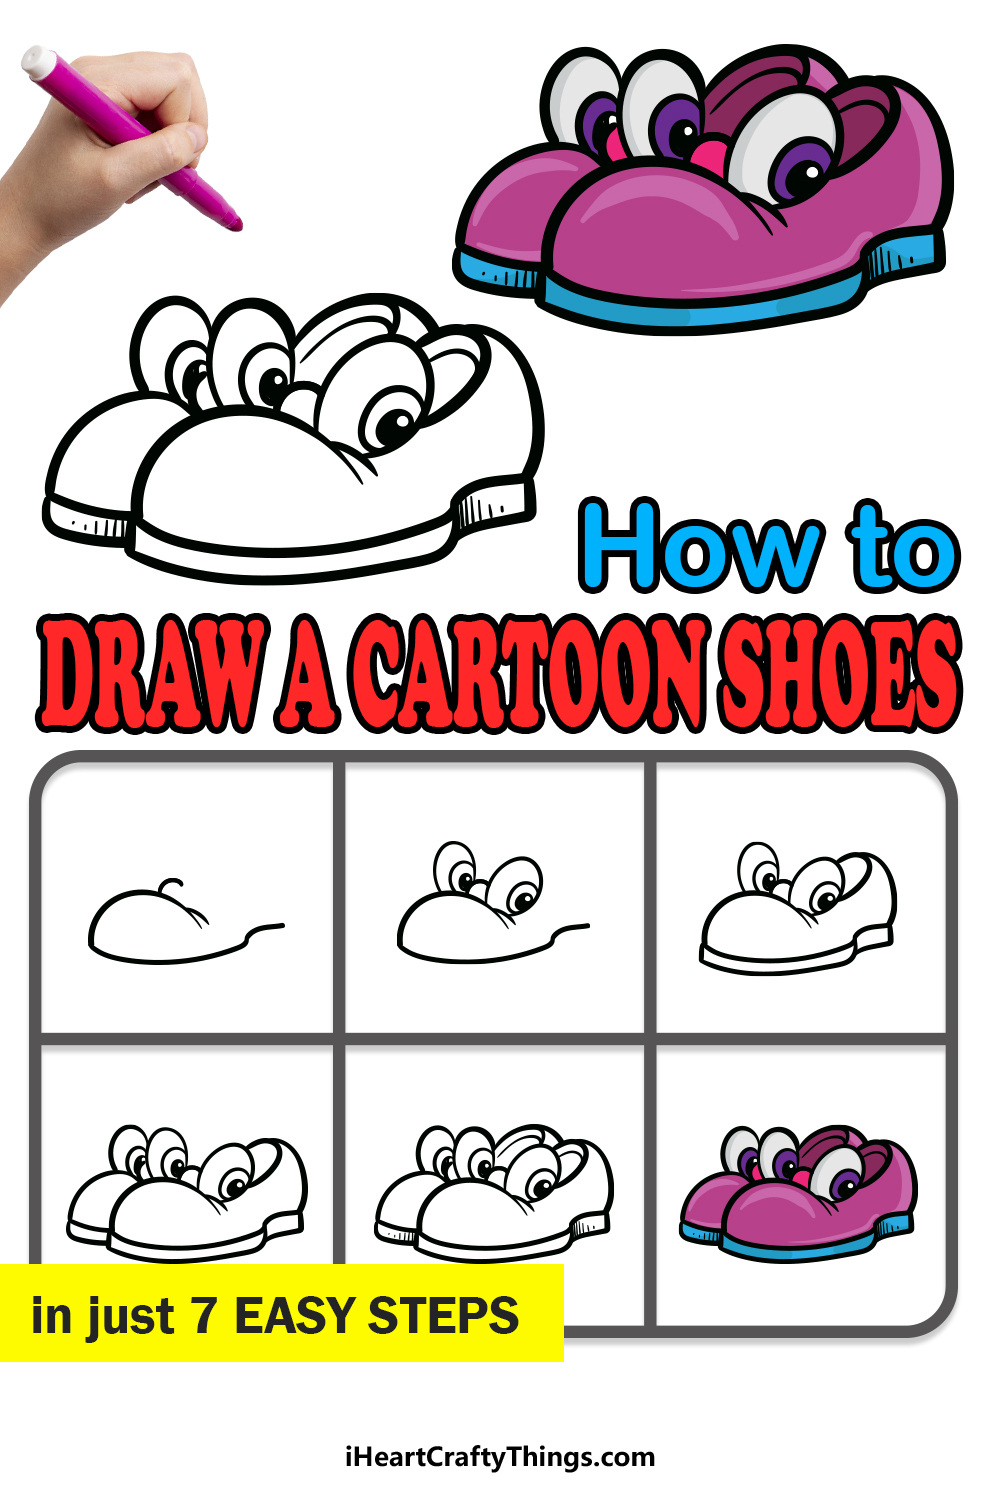 how to draw cartoon shoes in 7 easy steps